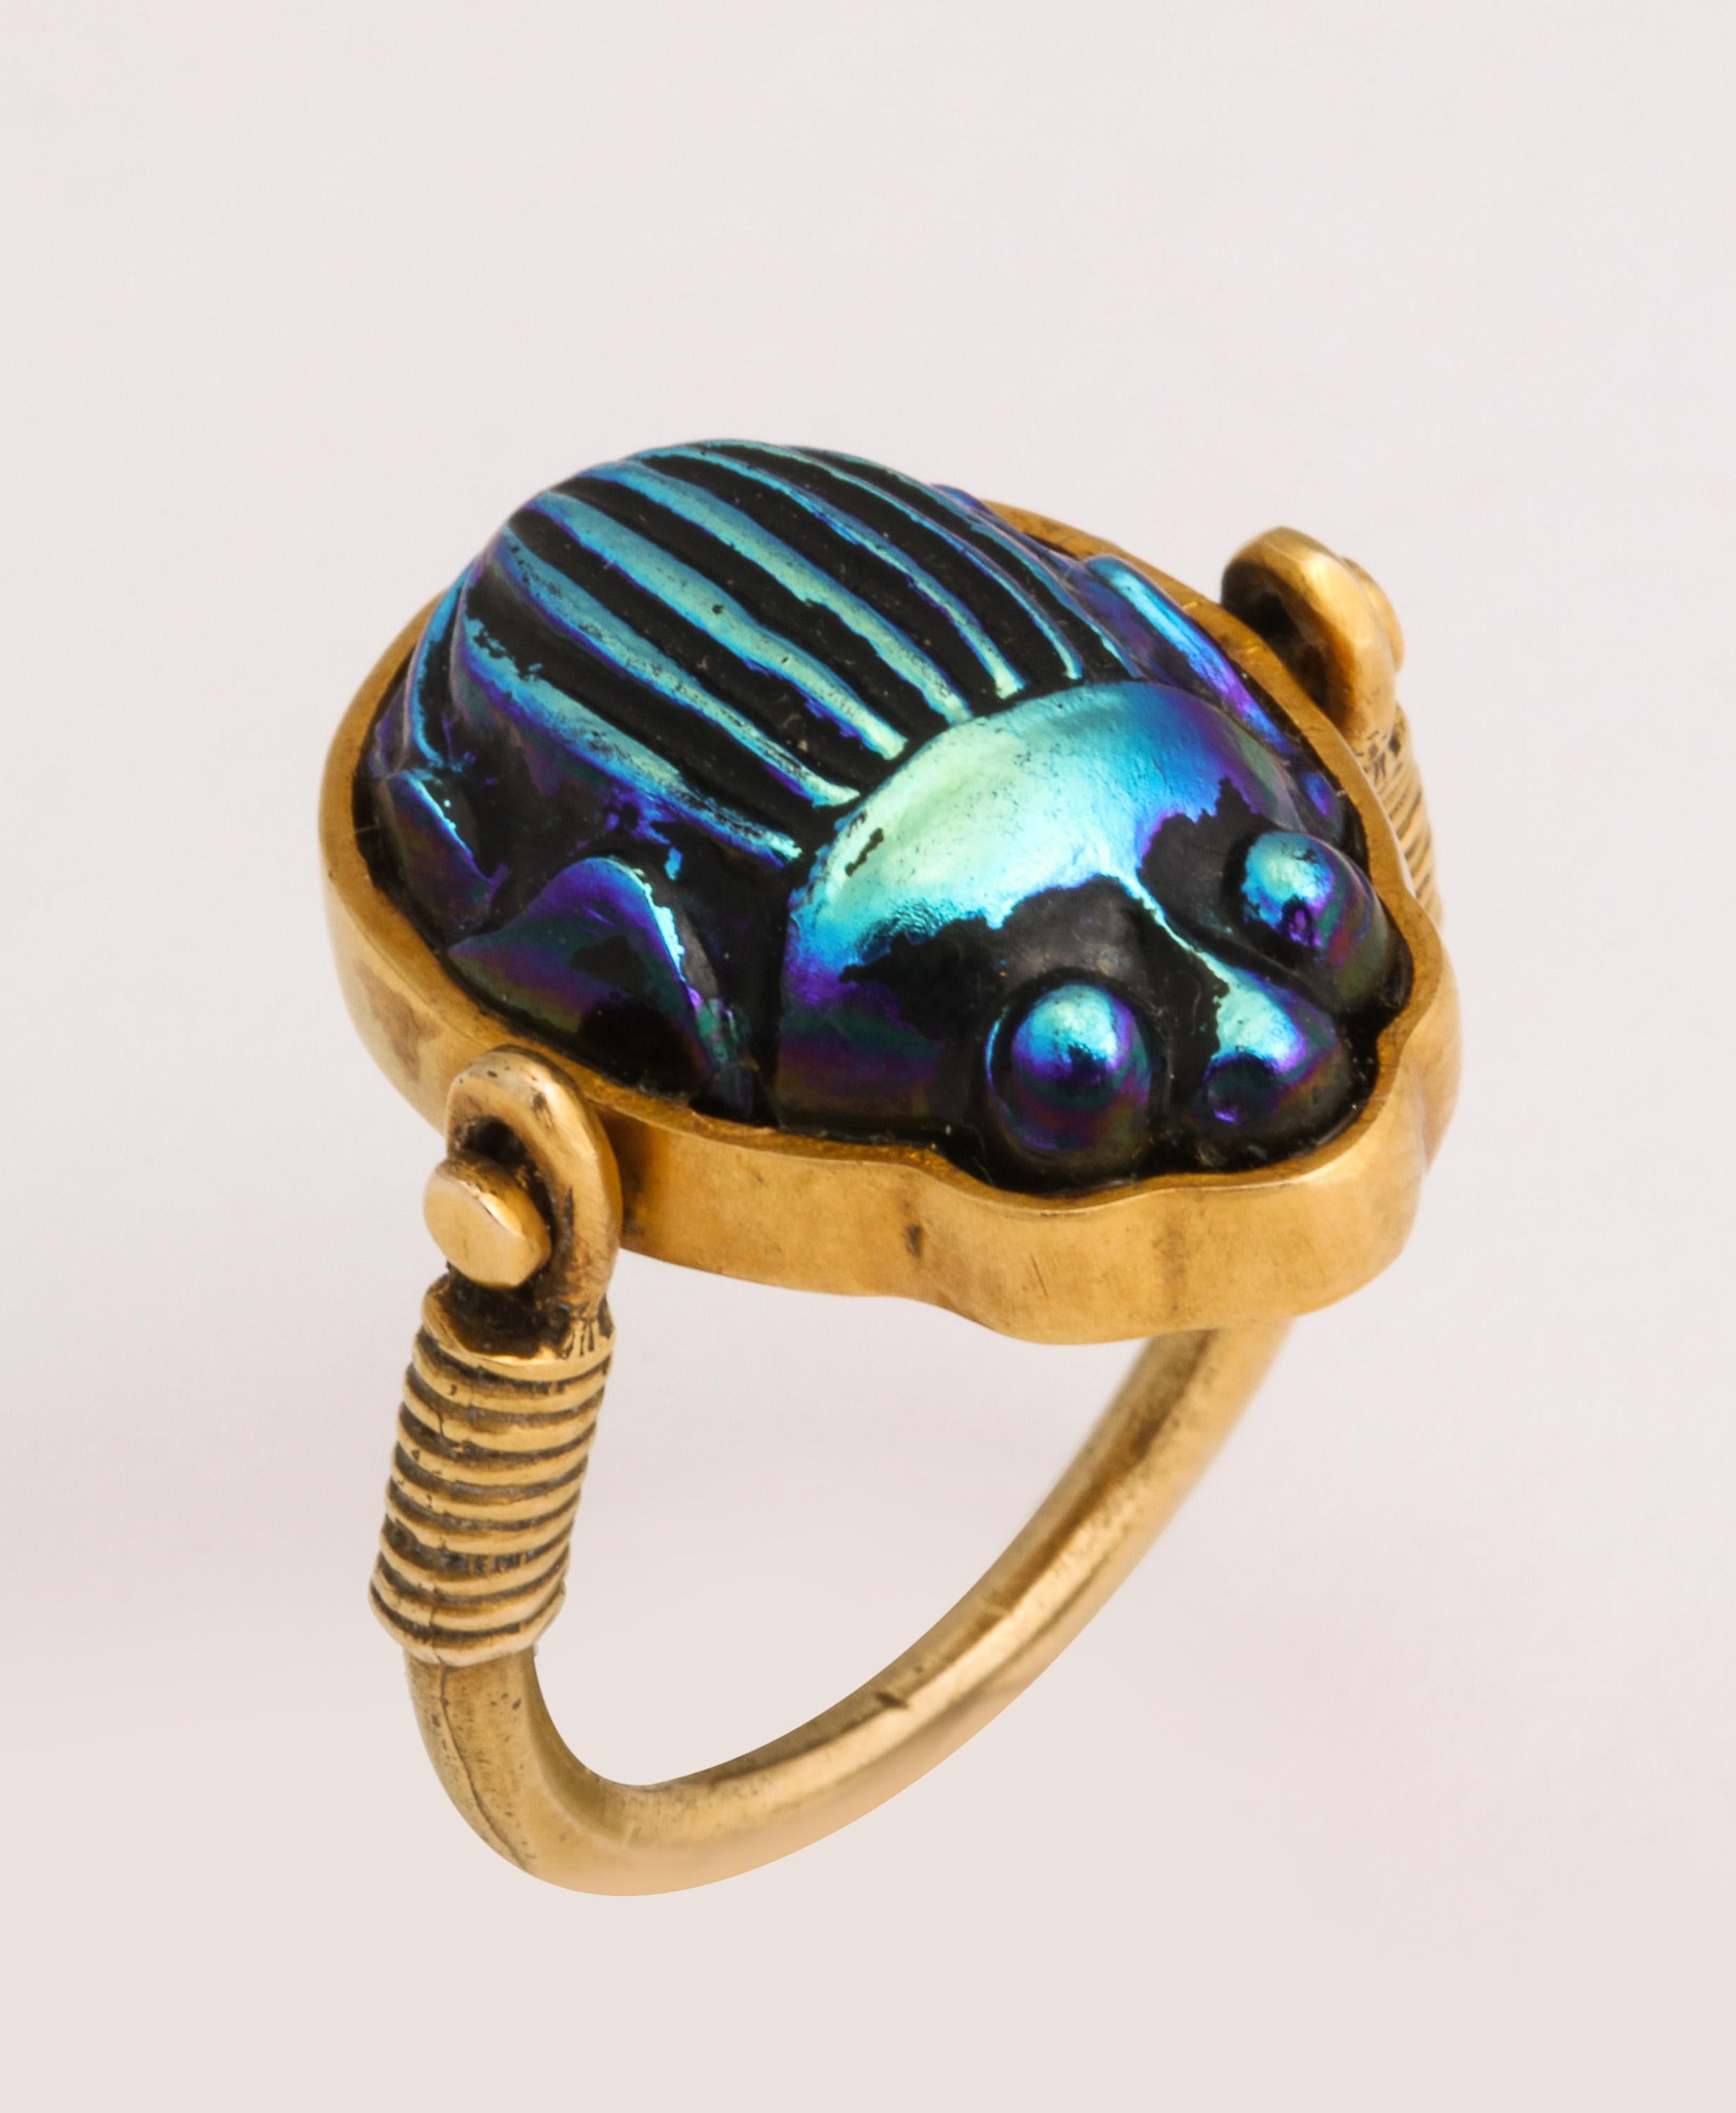 Scarab ring mounted in handmade Mounting.  Hand set  Iridescent Scarab which pivots and one can see Hieroglyphs on the reverse.  Set in 14kt Yellow Gold.  Scarab ca 1920-30 - after the Discovery of Tutankhamen's Tomb.  Mounting ca 1970/80 .  Size 5